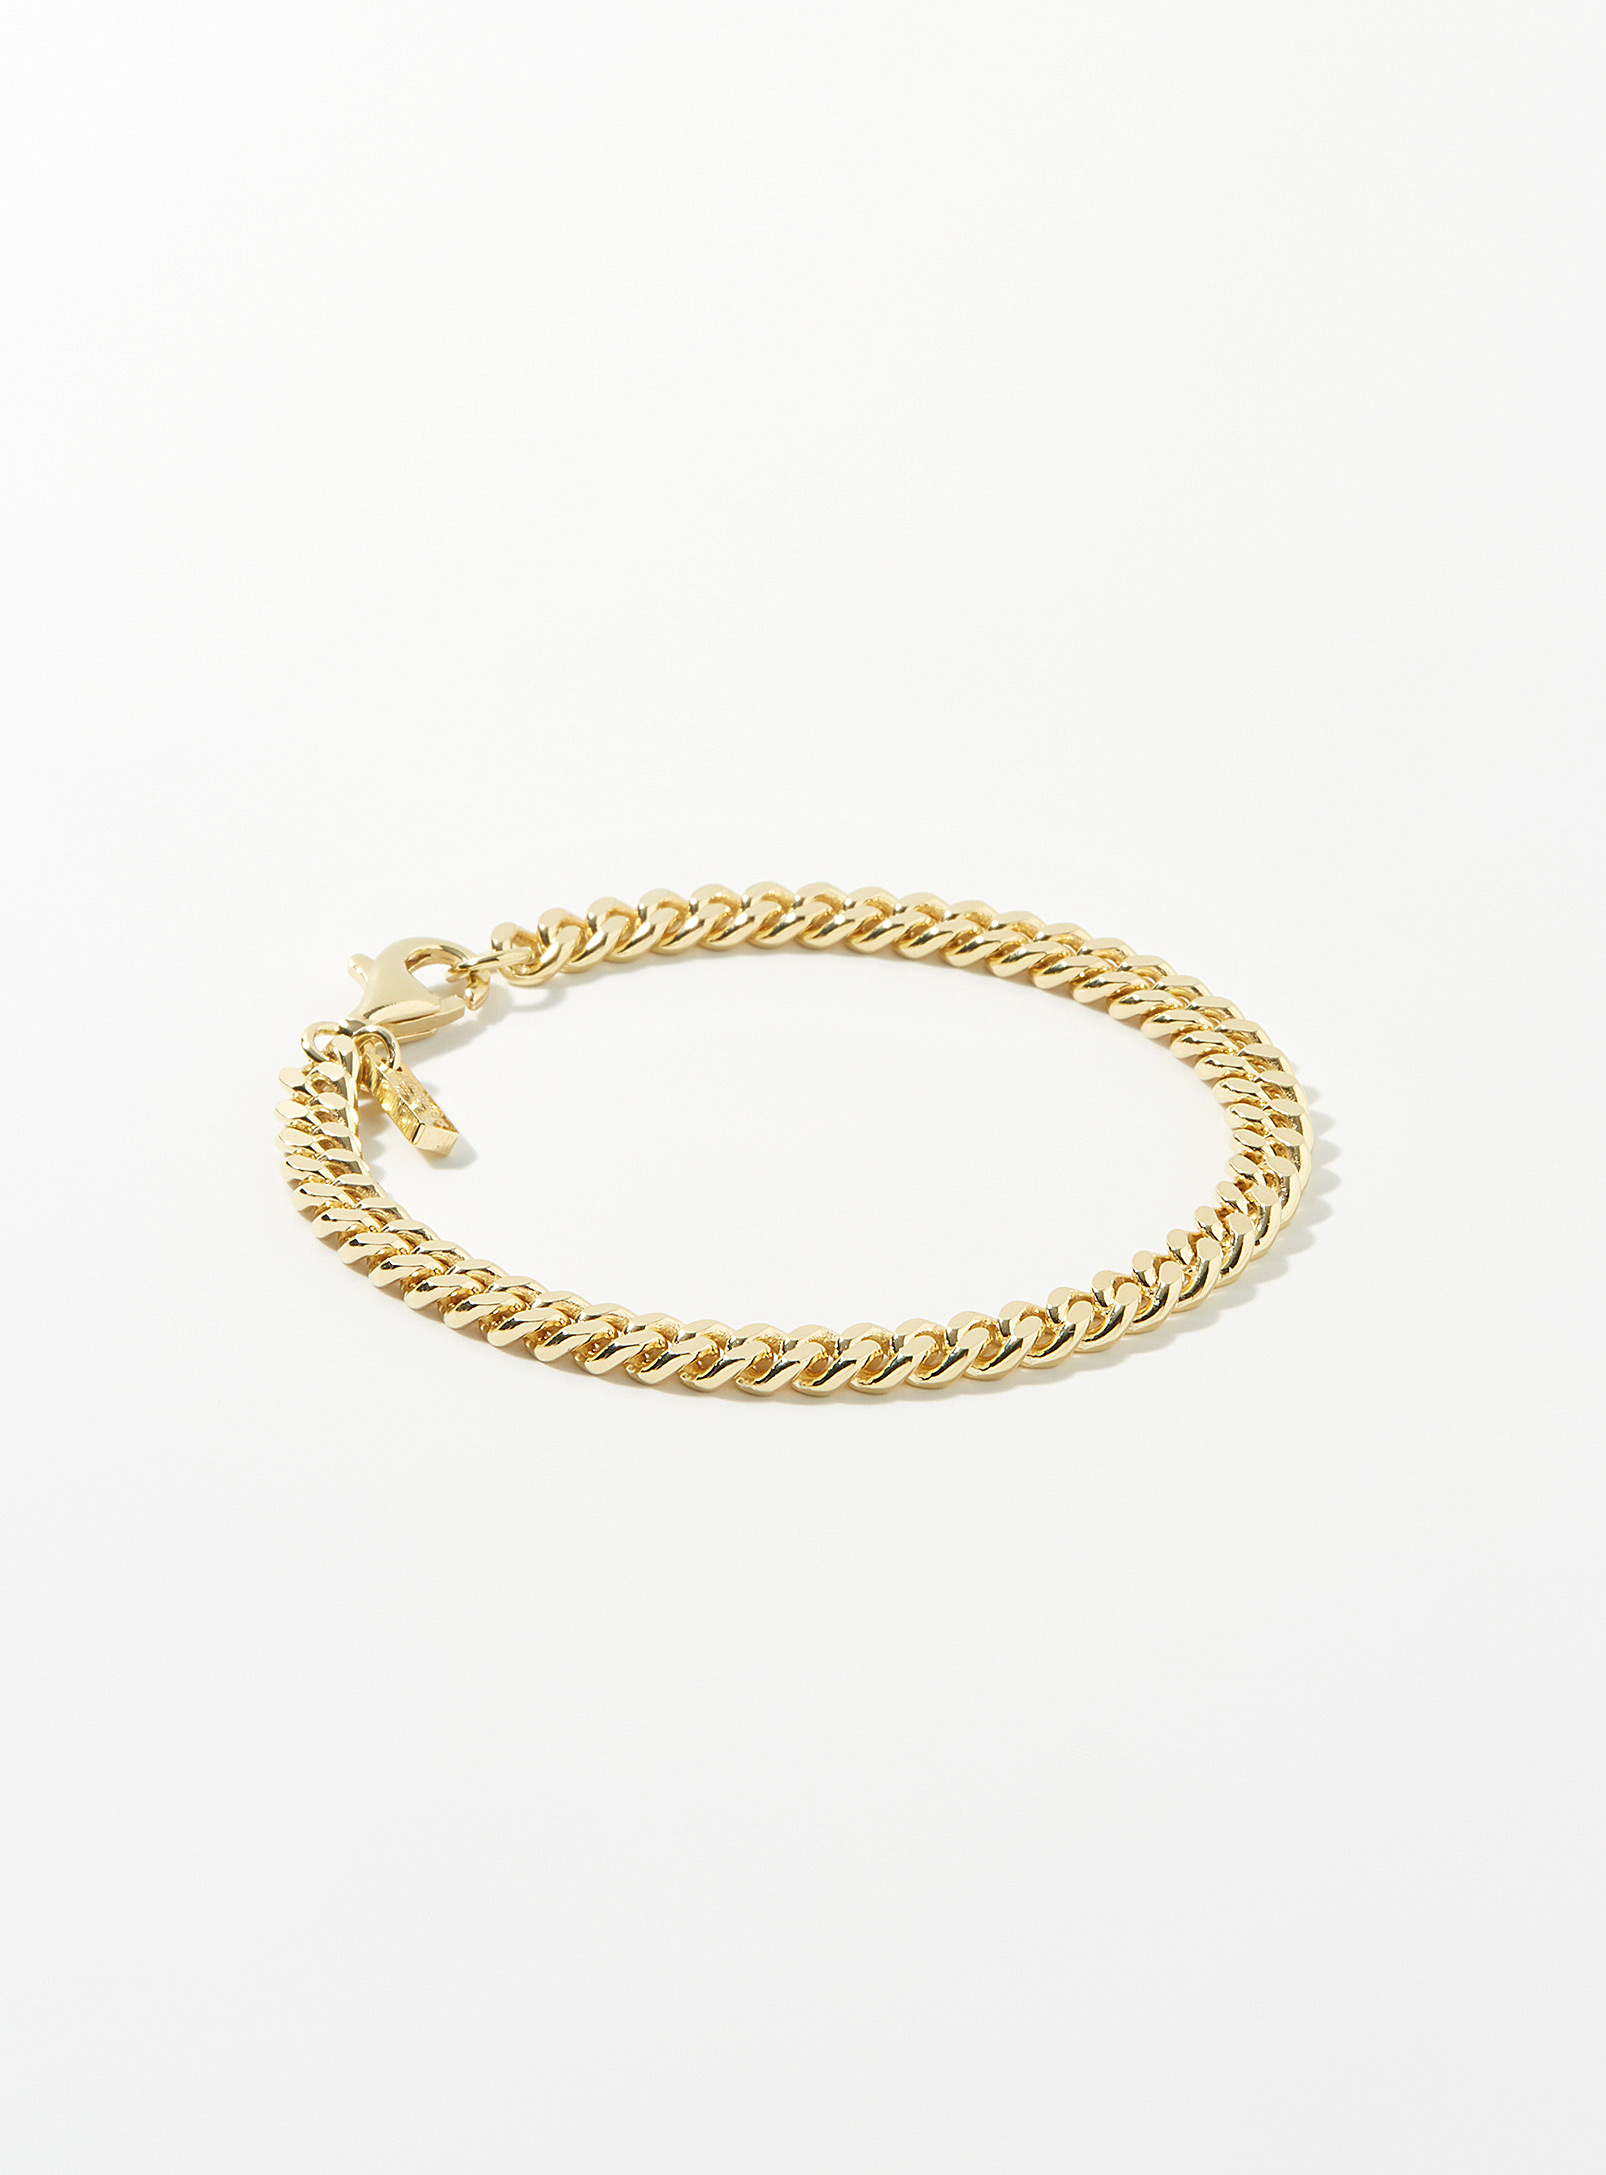 HATTON LABS CUBAN GOLD-PLATED CHAIN BRACELET